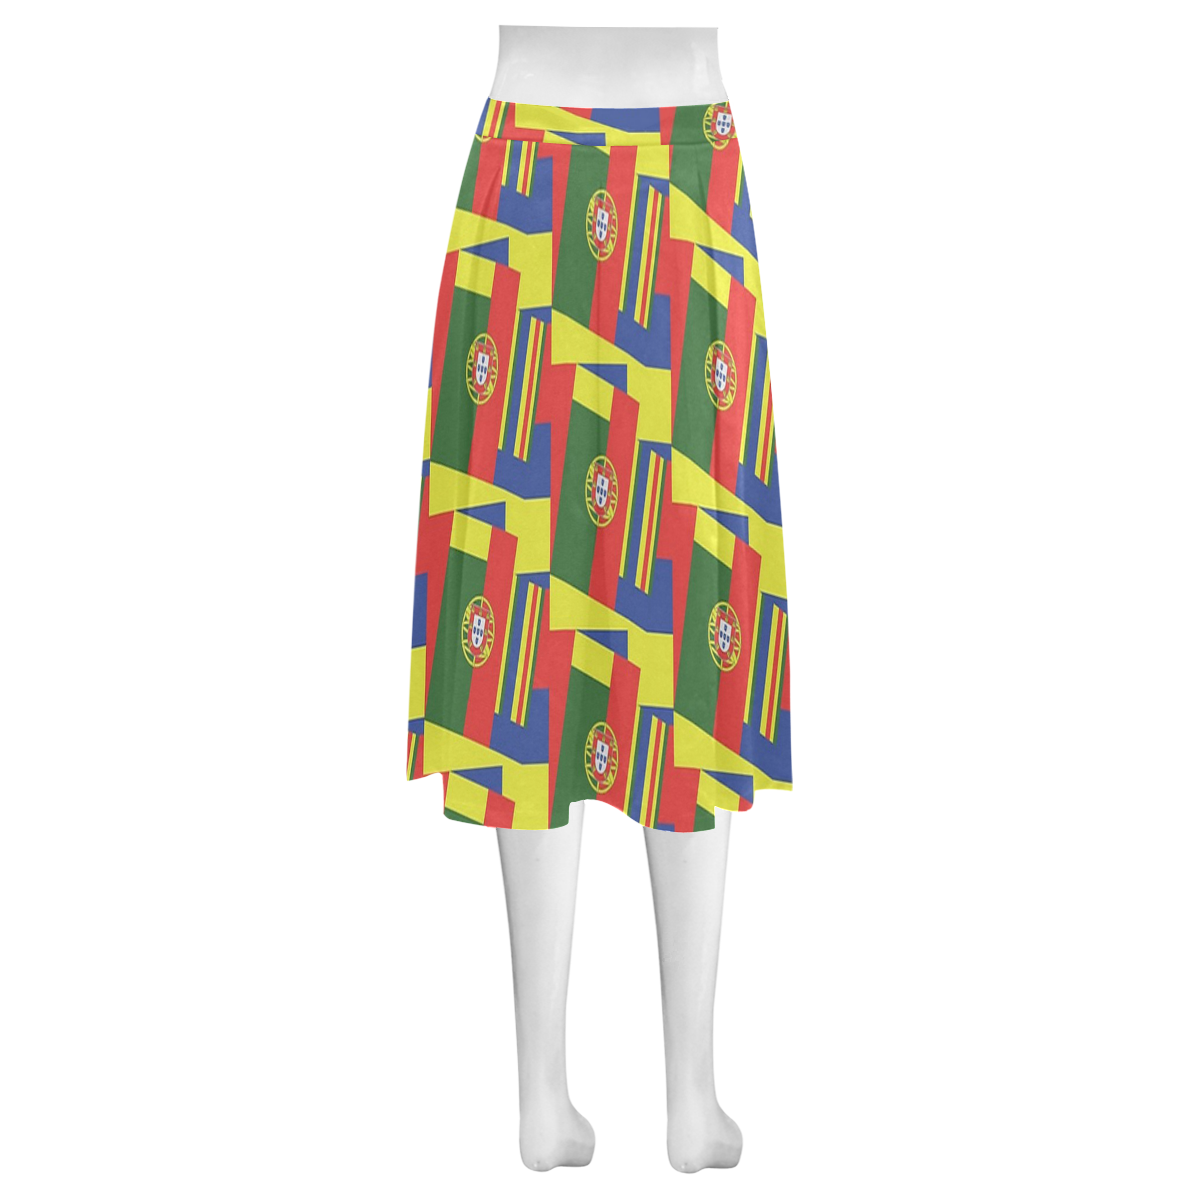 PORTUGAL (ABSTRACT) 2 Mnemosyne Women's Crepe Skirt (Model D16)